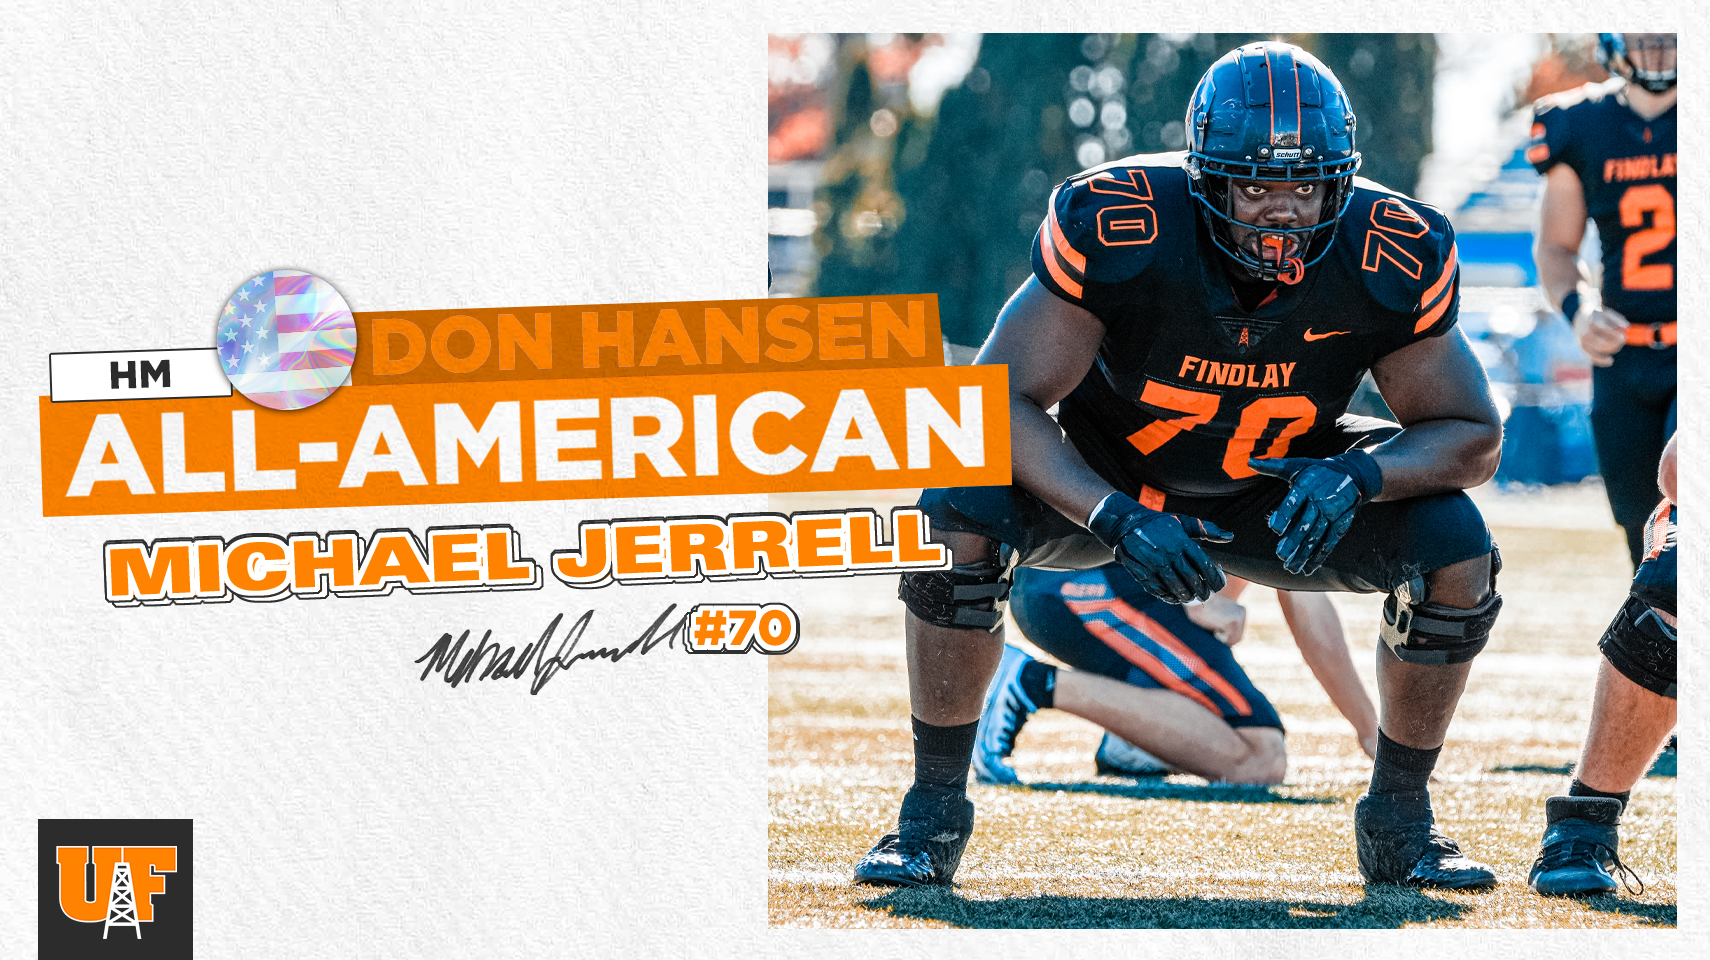 Mike Jerrell all-american graphic